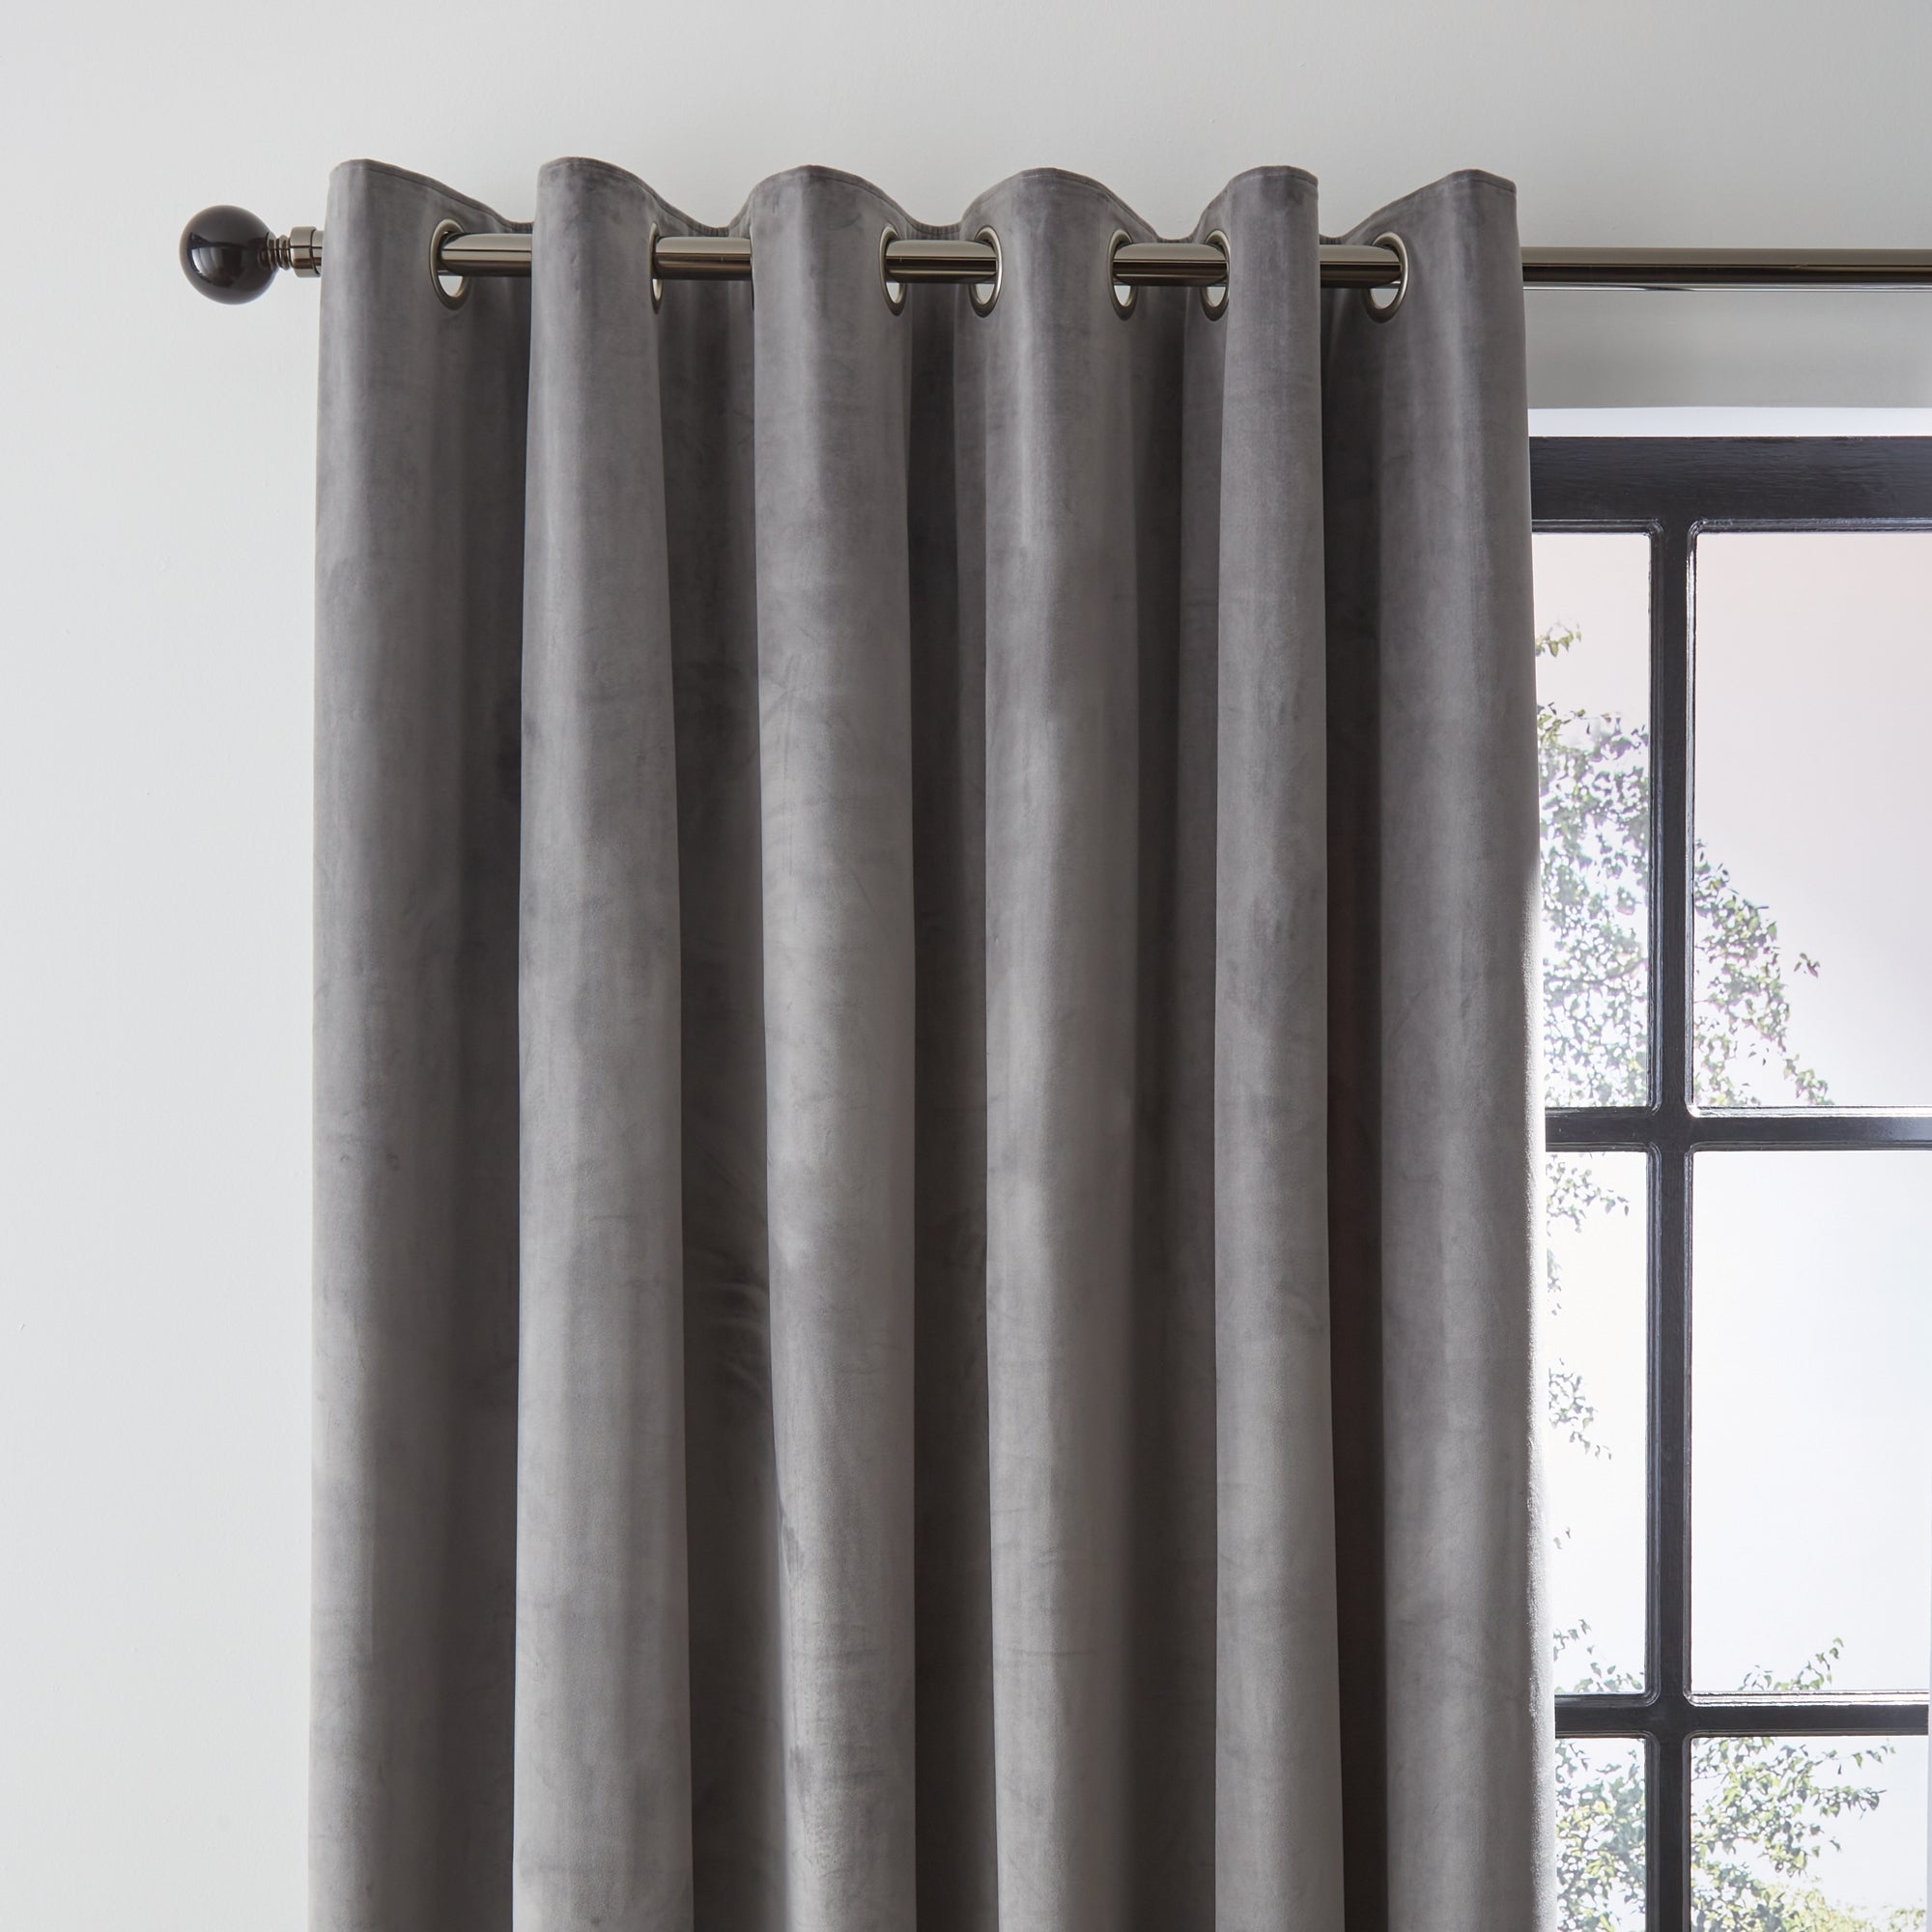 Asha Recycled Velour Lined Eyelet Curtains from Love My Window